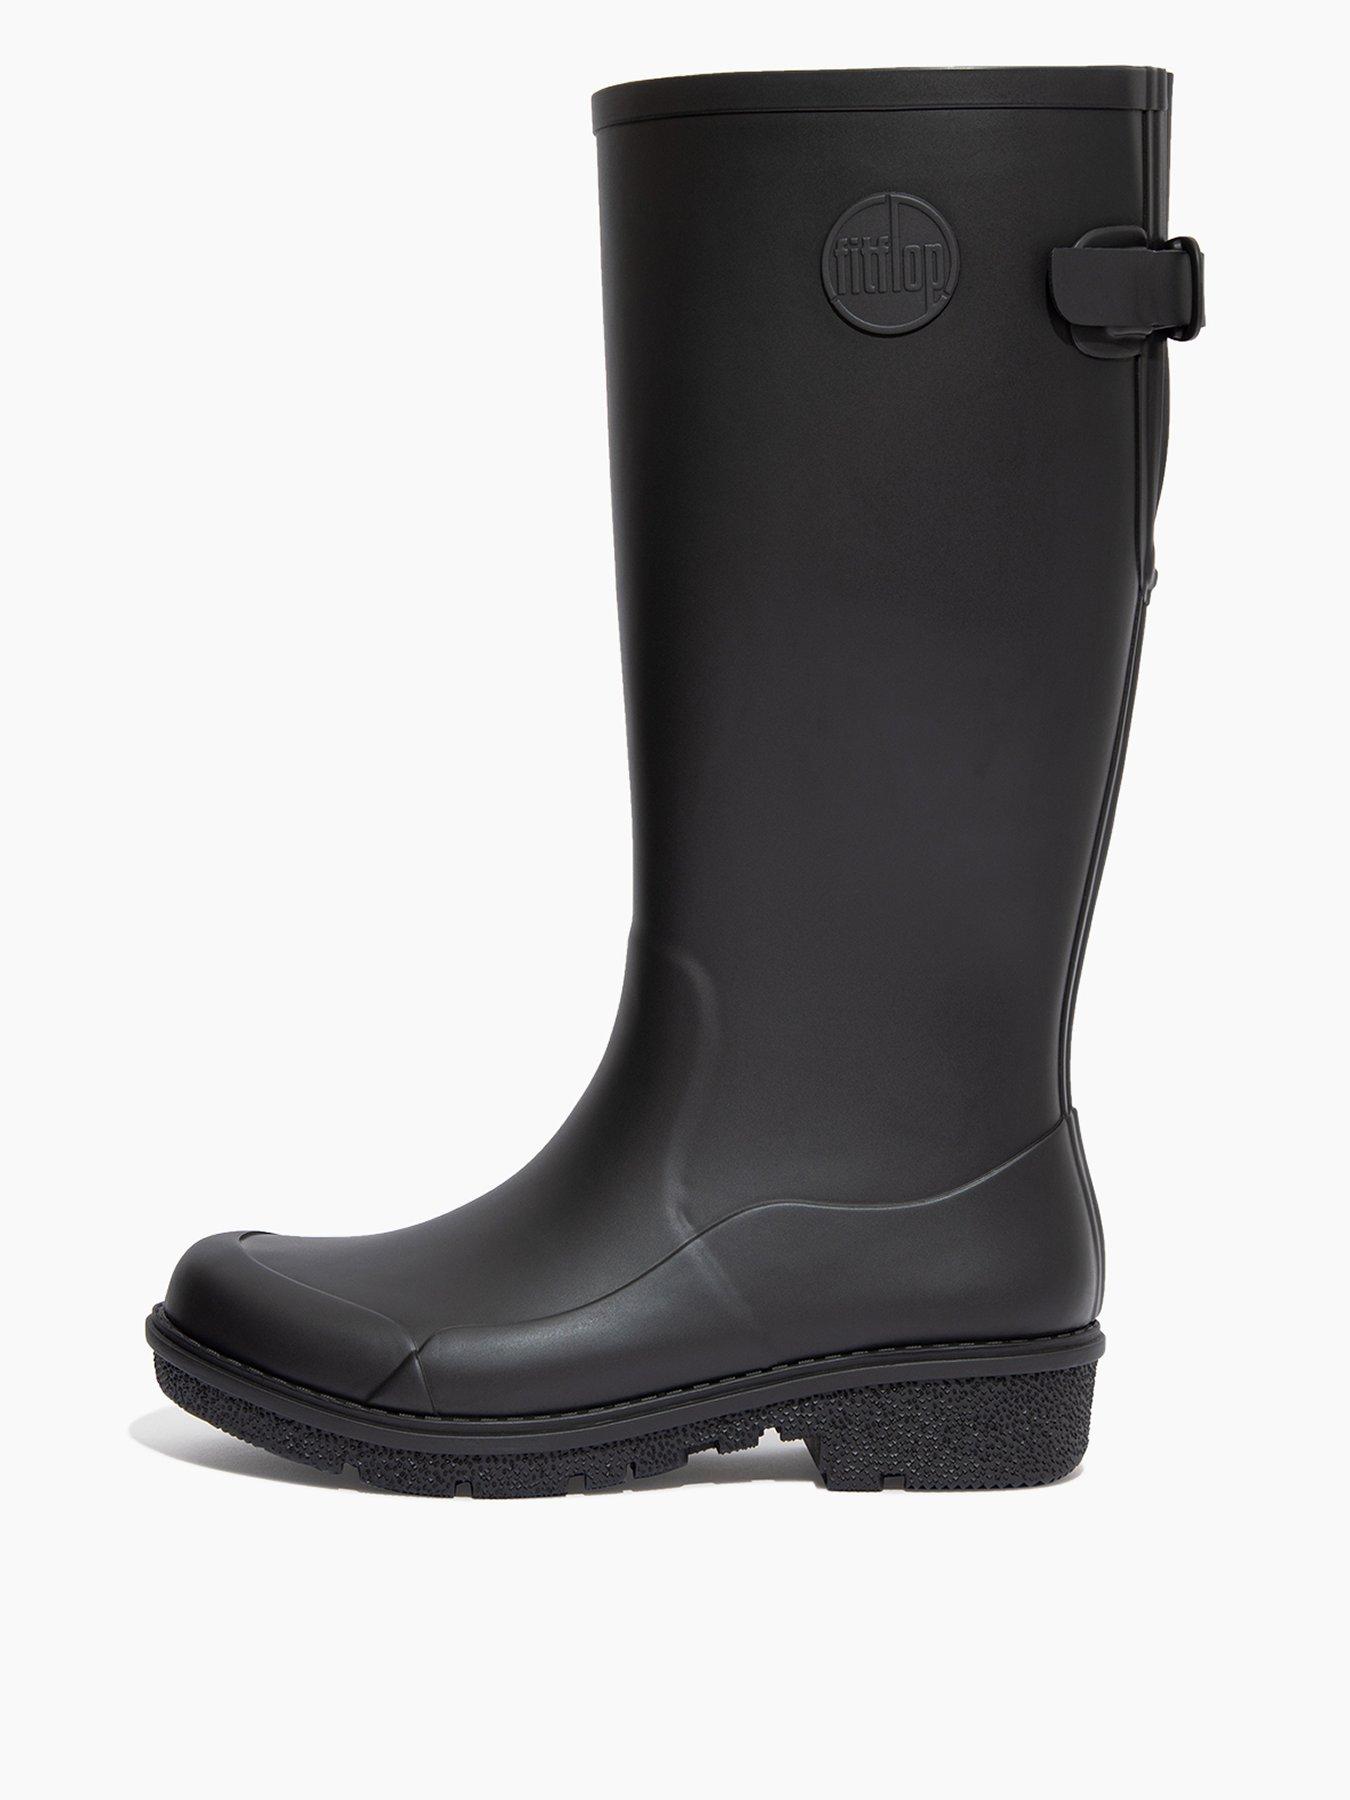 Shoes & boots Wonderwelly Tall Wellington Boots - Black